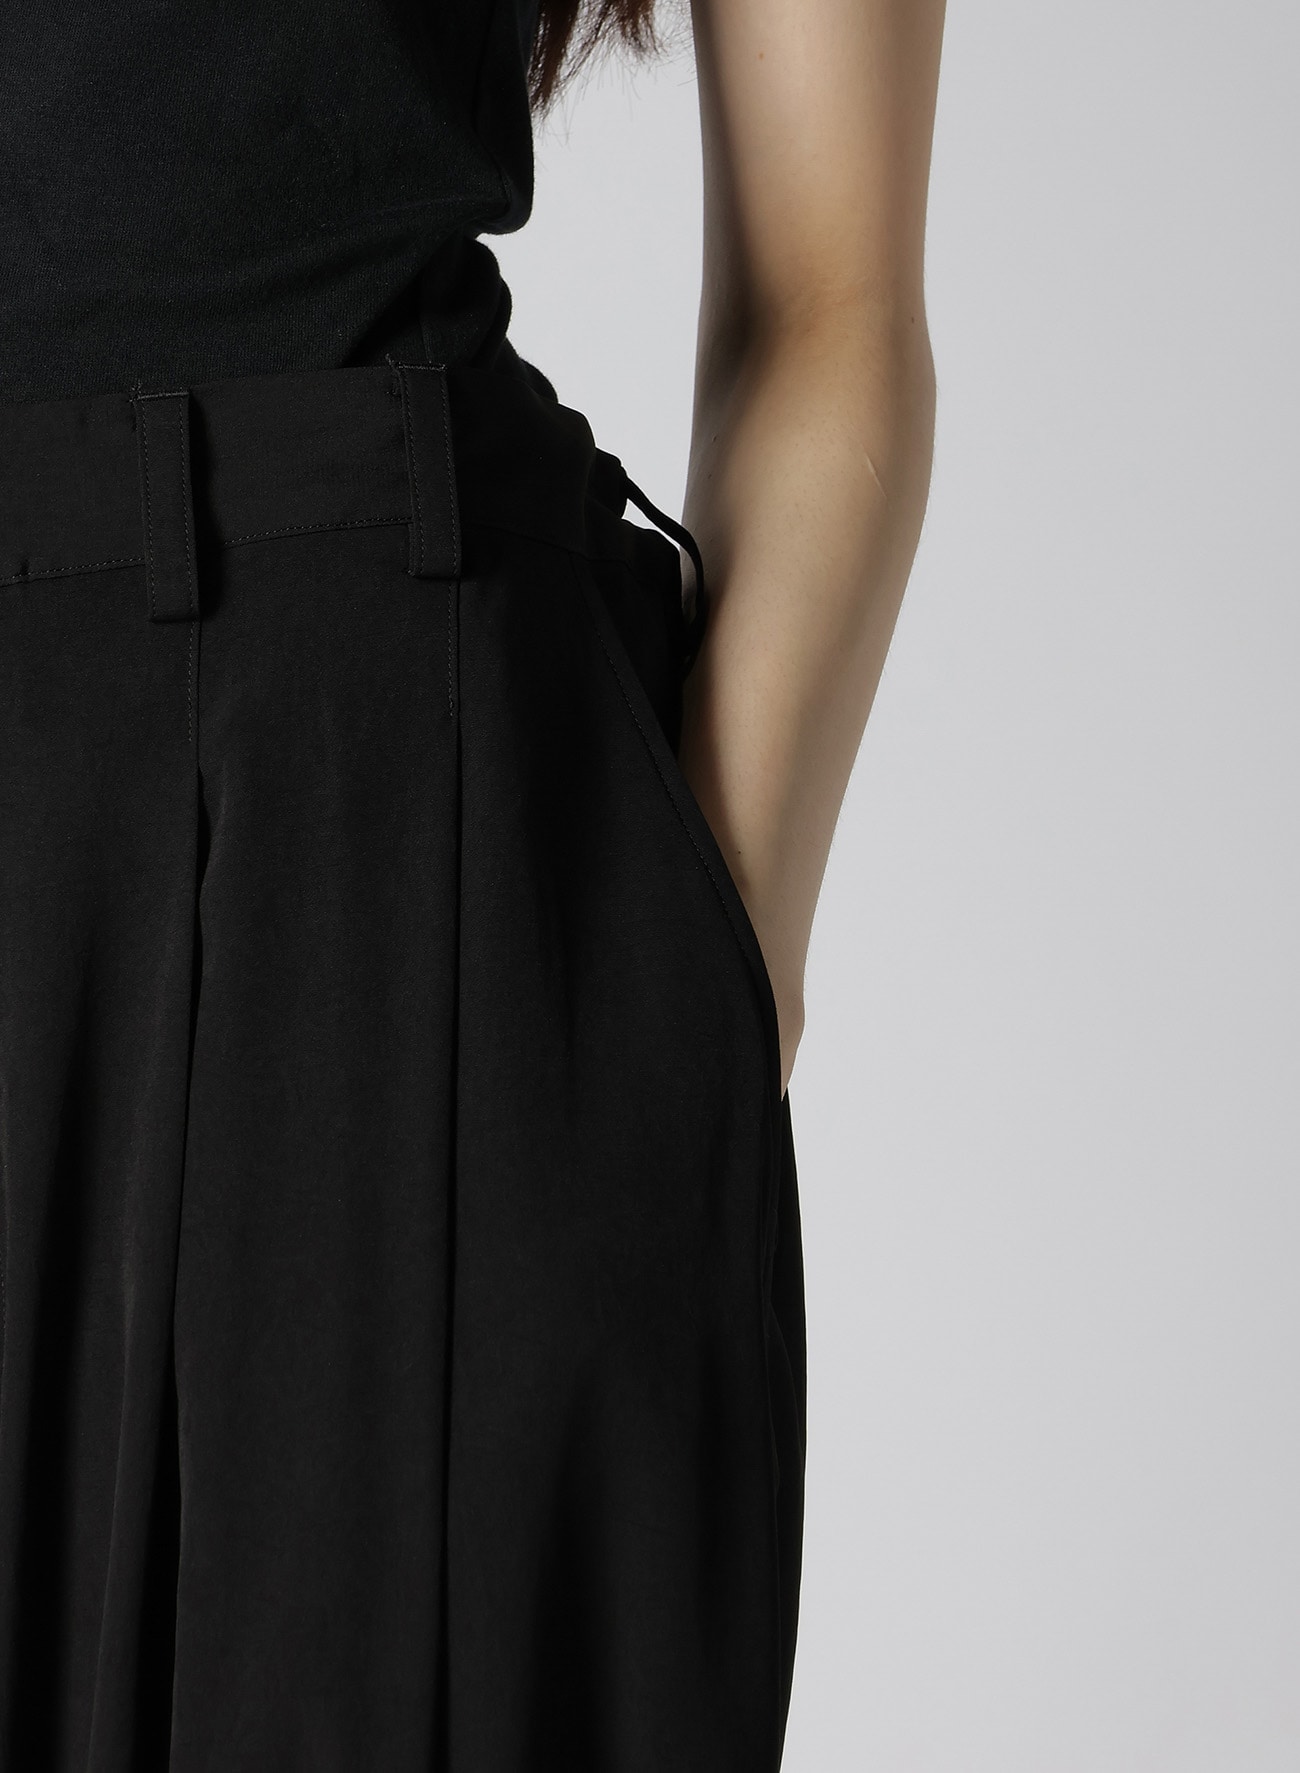 TRIACETATE/POLYESTER CREPE de CHINE TWO TUCK DRAWCORD PANTS